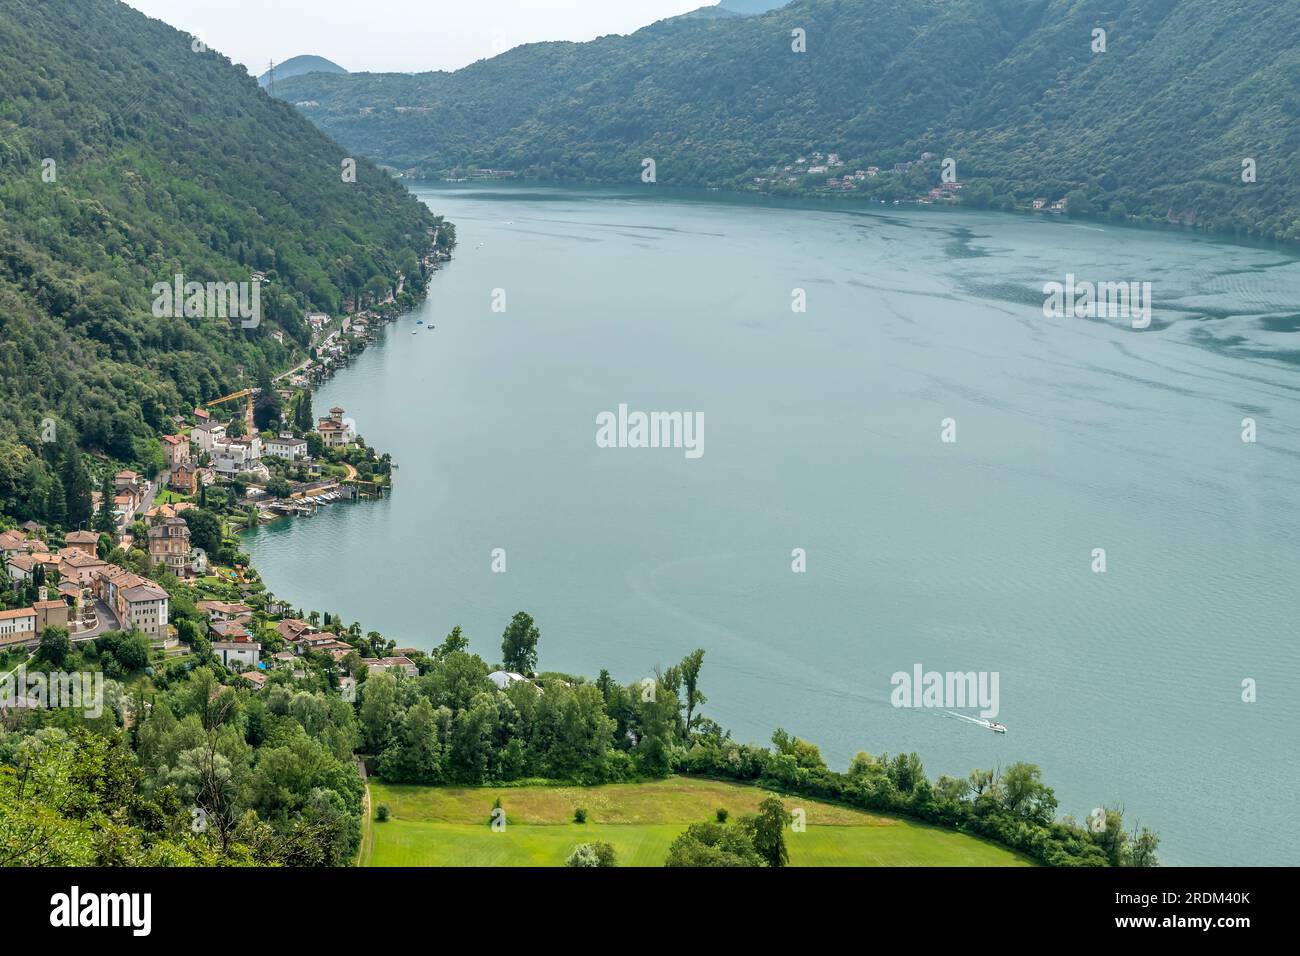 Aerial view of Lake Lugano, Switzerland, from the Sasso delle Parole viewpoint Stock Photo